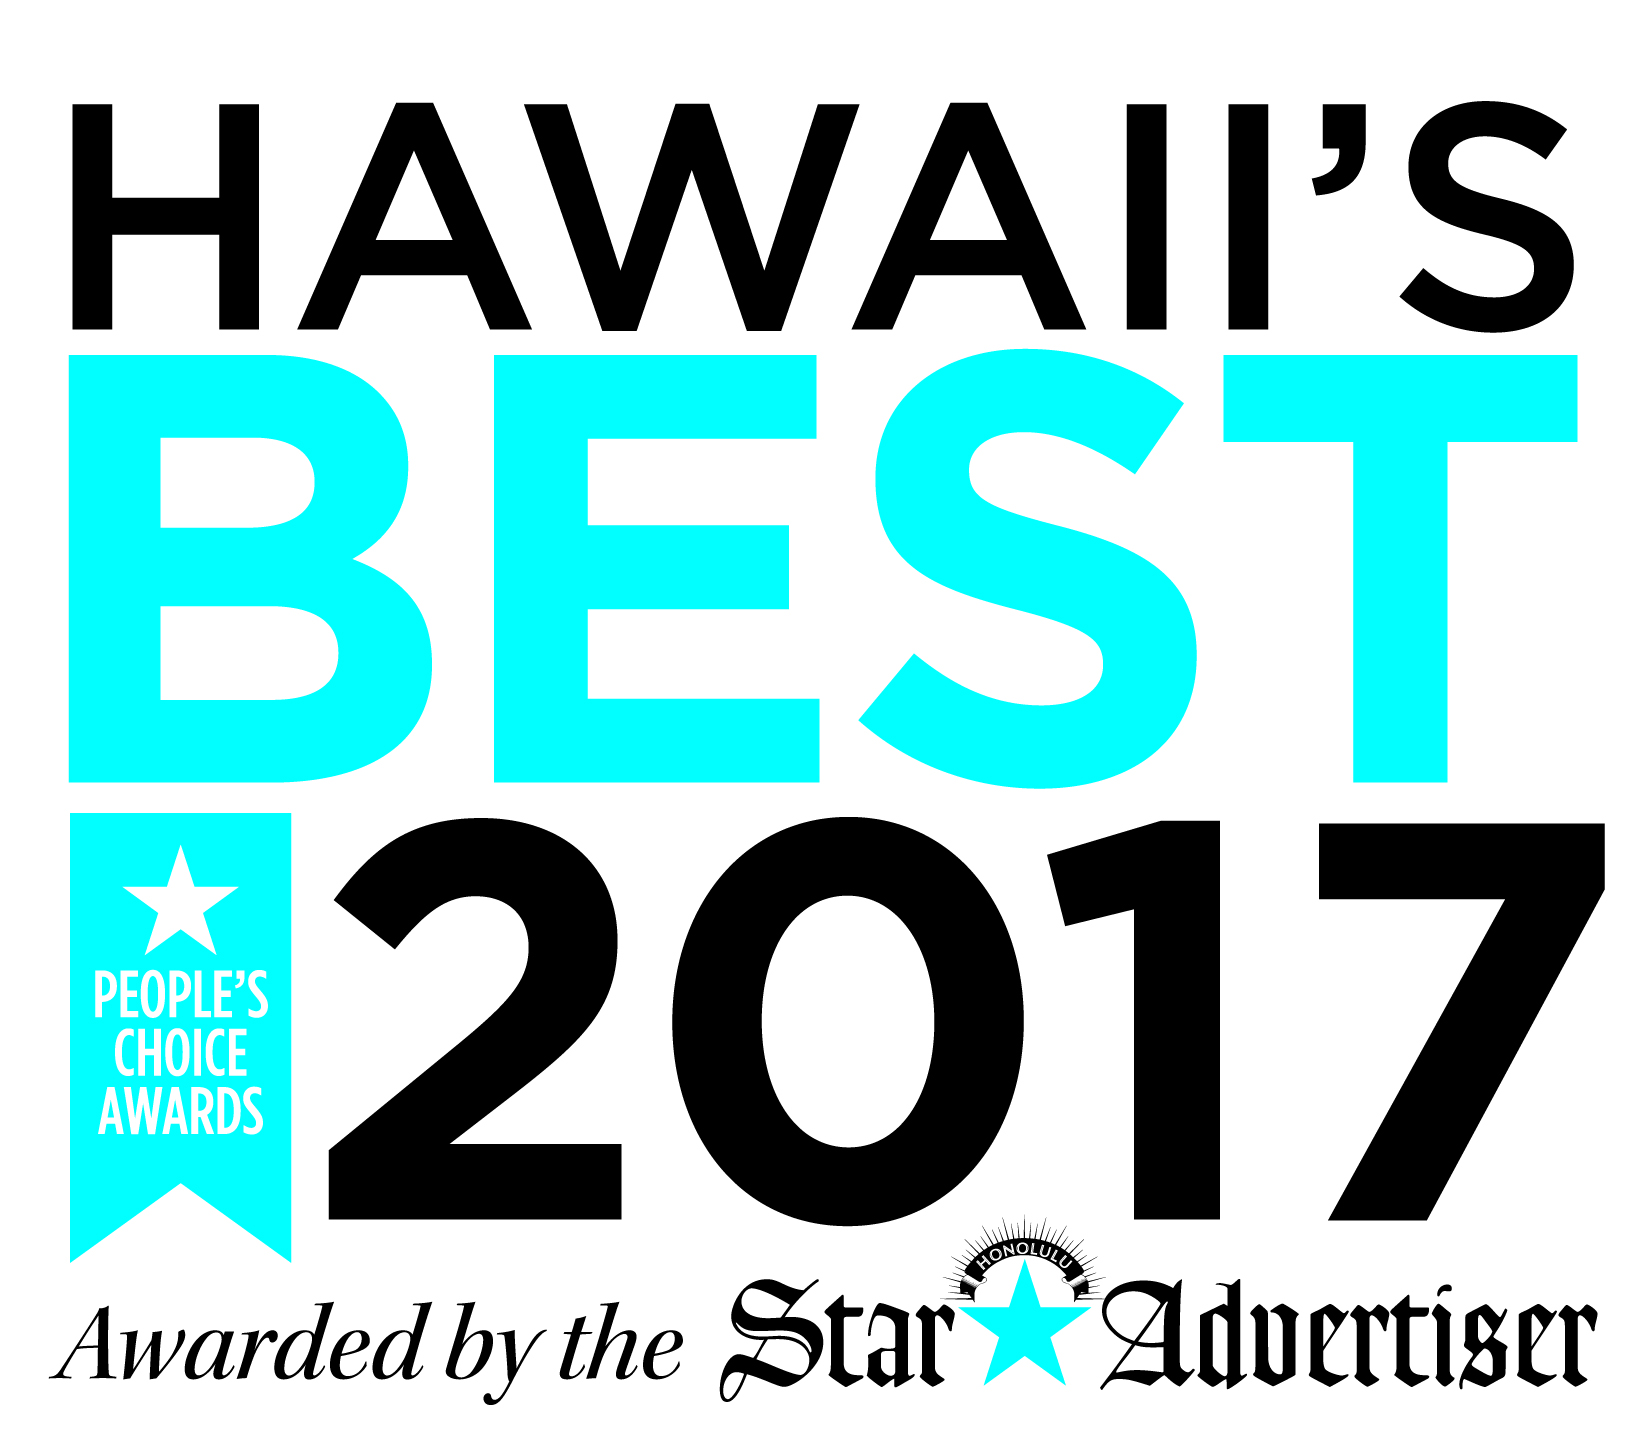 Advantage Realty Voted Hawaii's Best 2017